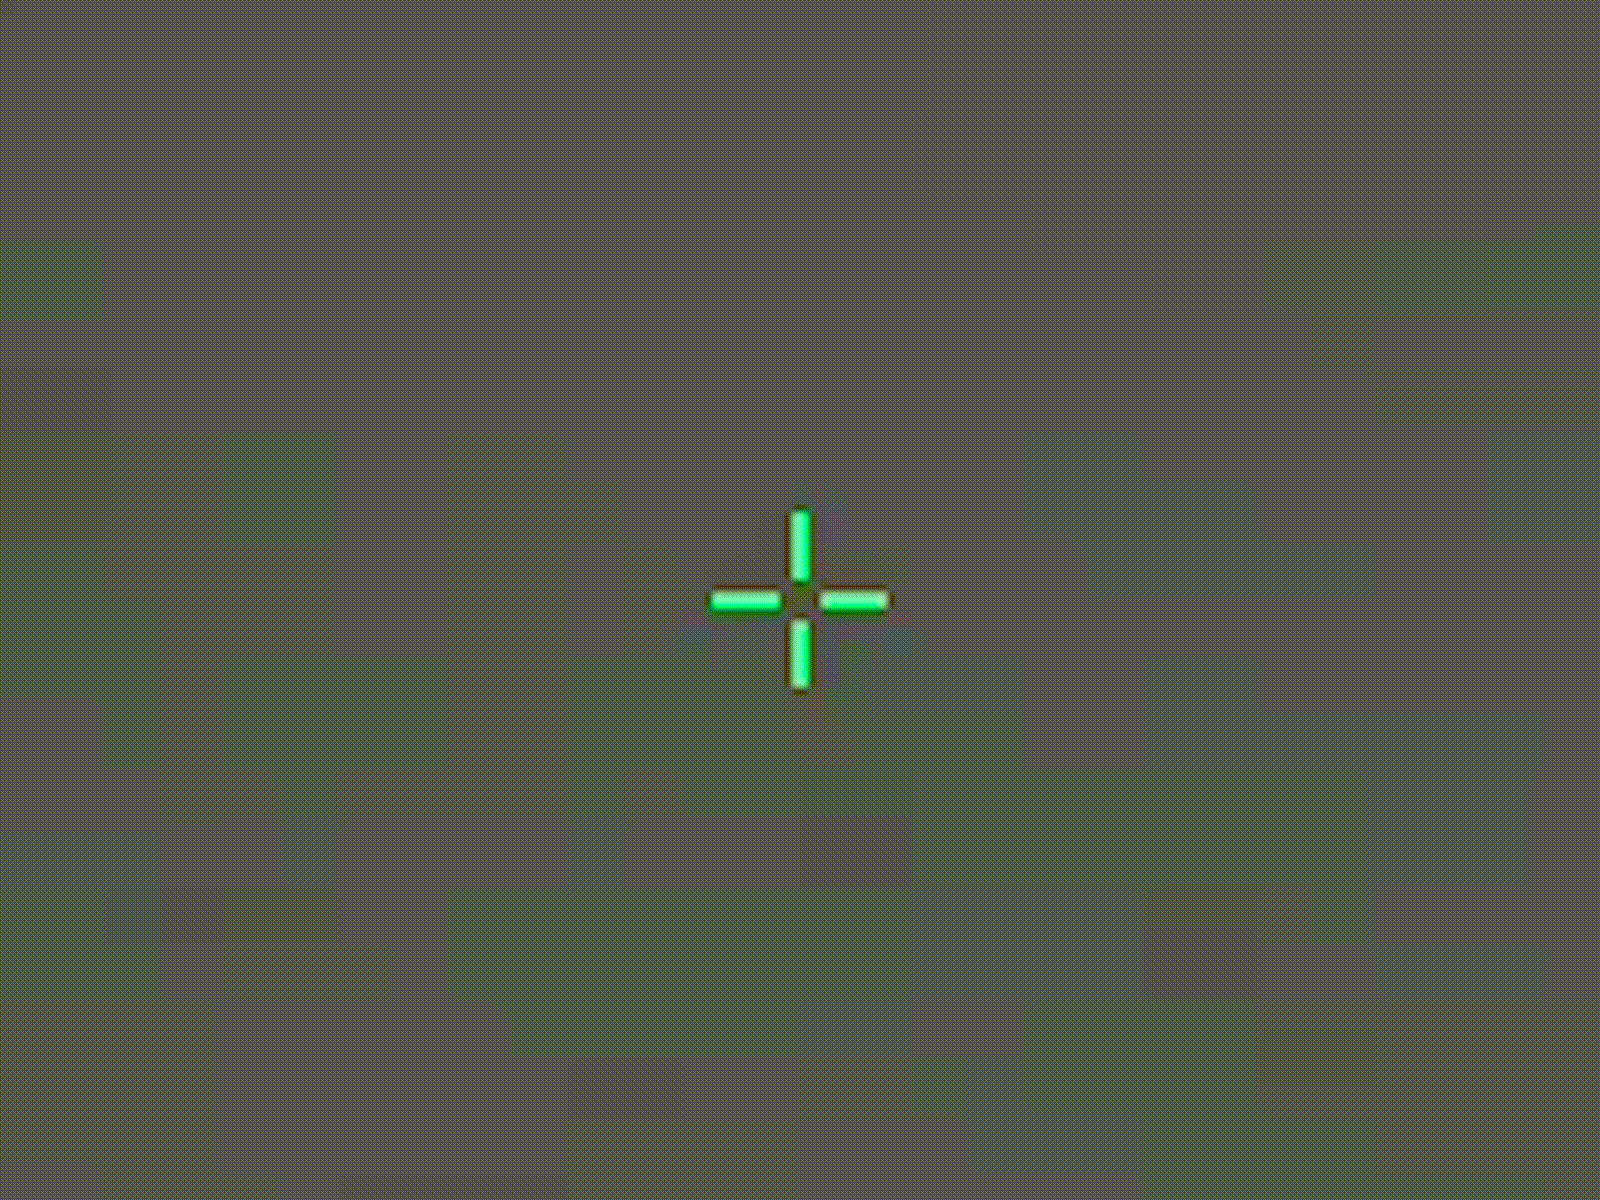 bind "кнопка" "toggle cl_crosshair_outlinethickness 0 1 0.5;...